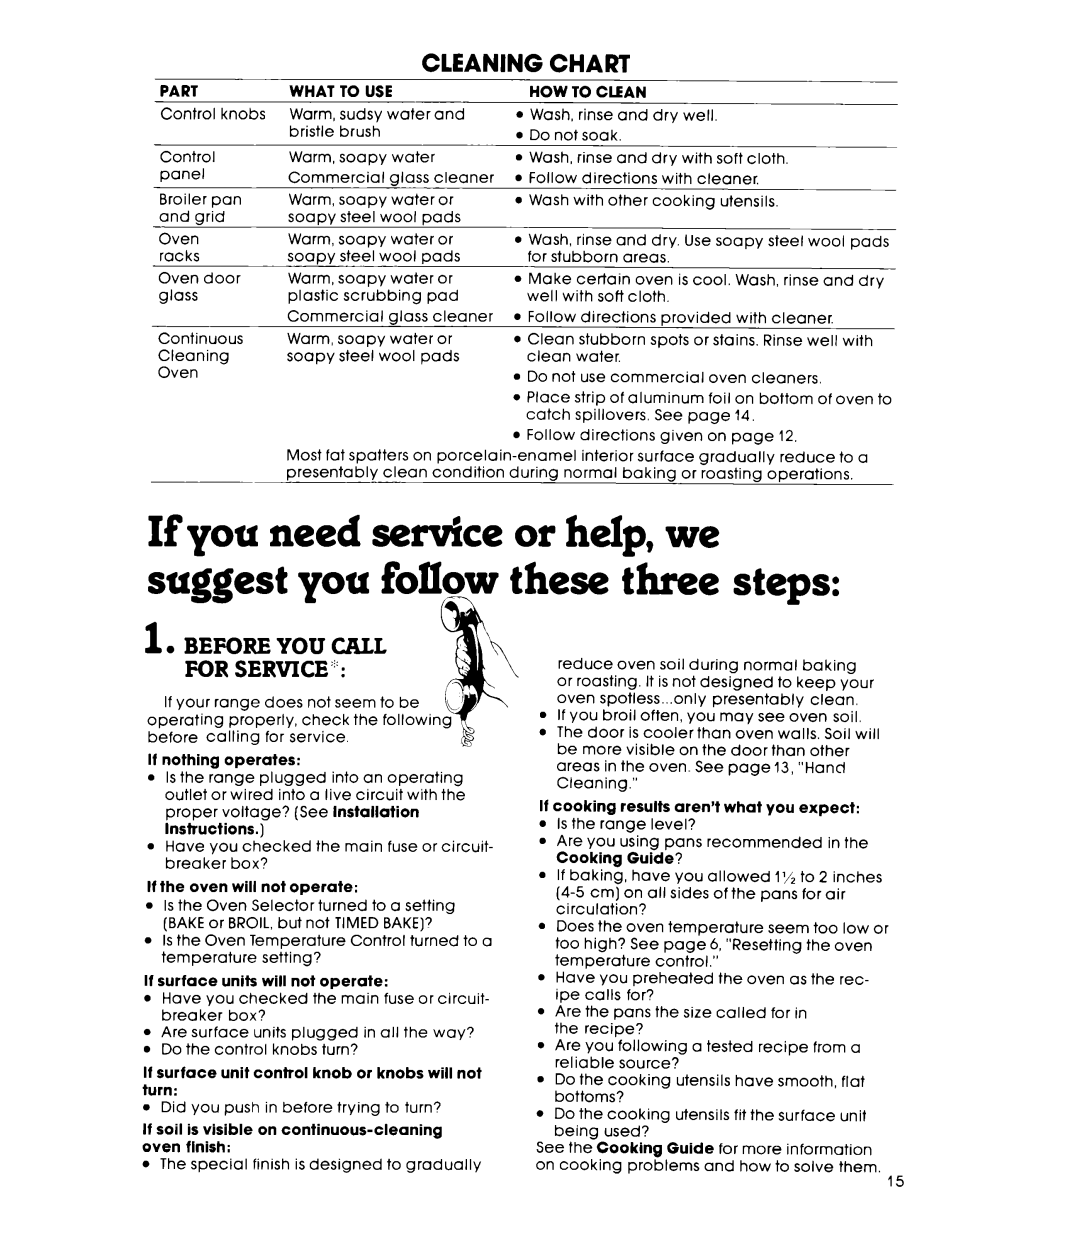 Whirlpool RF4400XL manual If you need servke or help, we, suggest you follow these three steps /z---l, Cleaning, Chart 